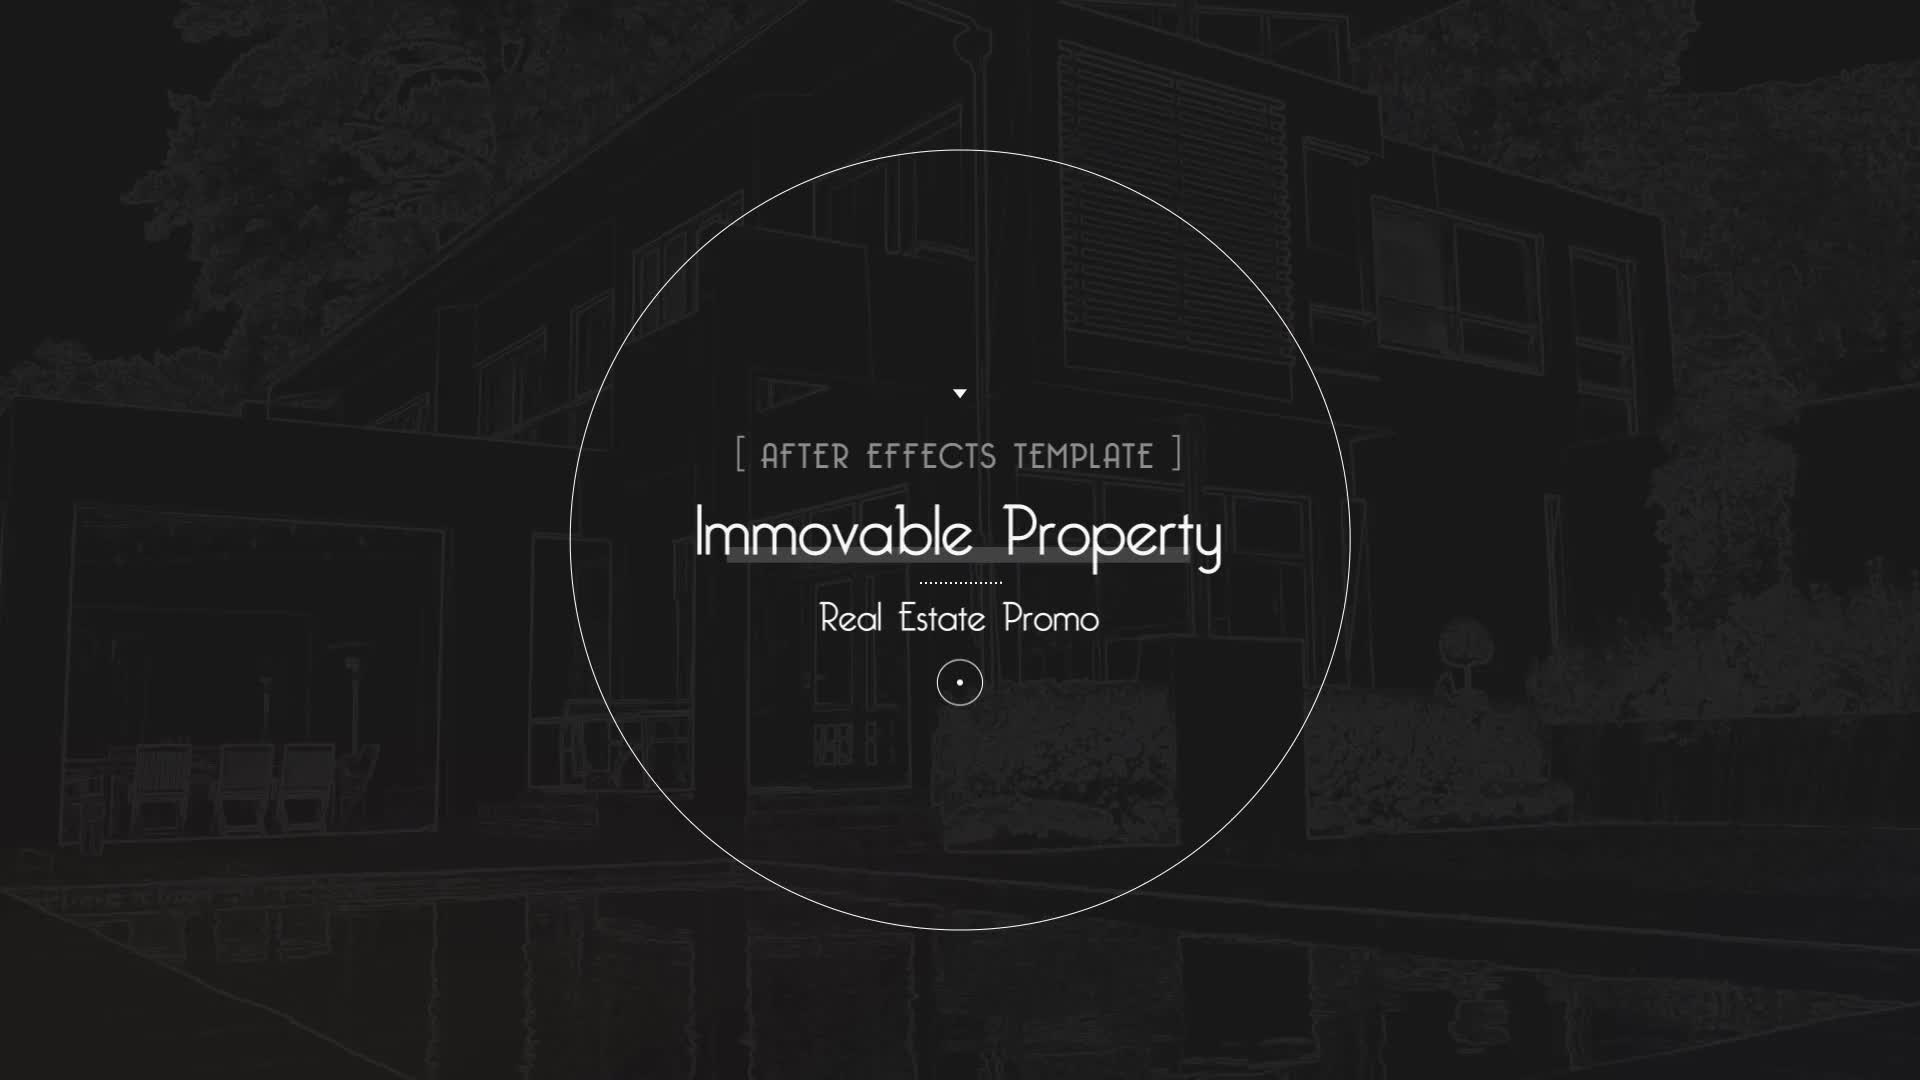  Immovable Property - Real Estate 